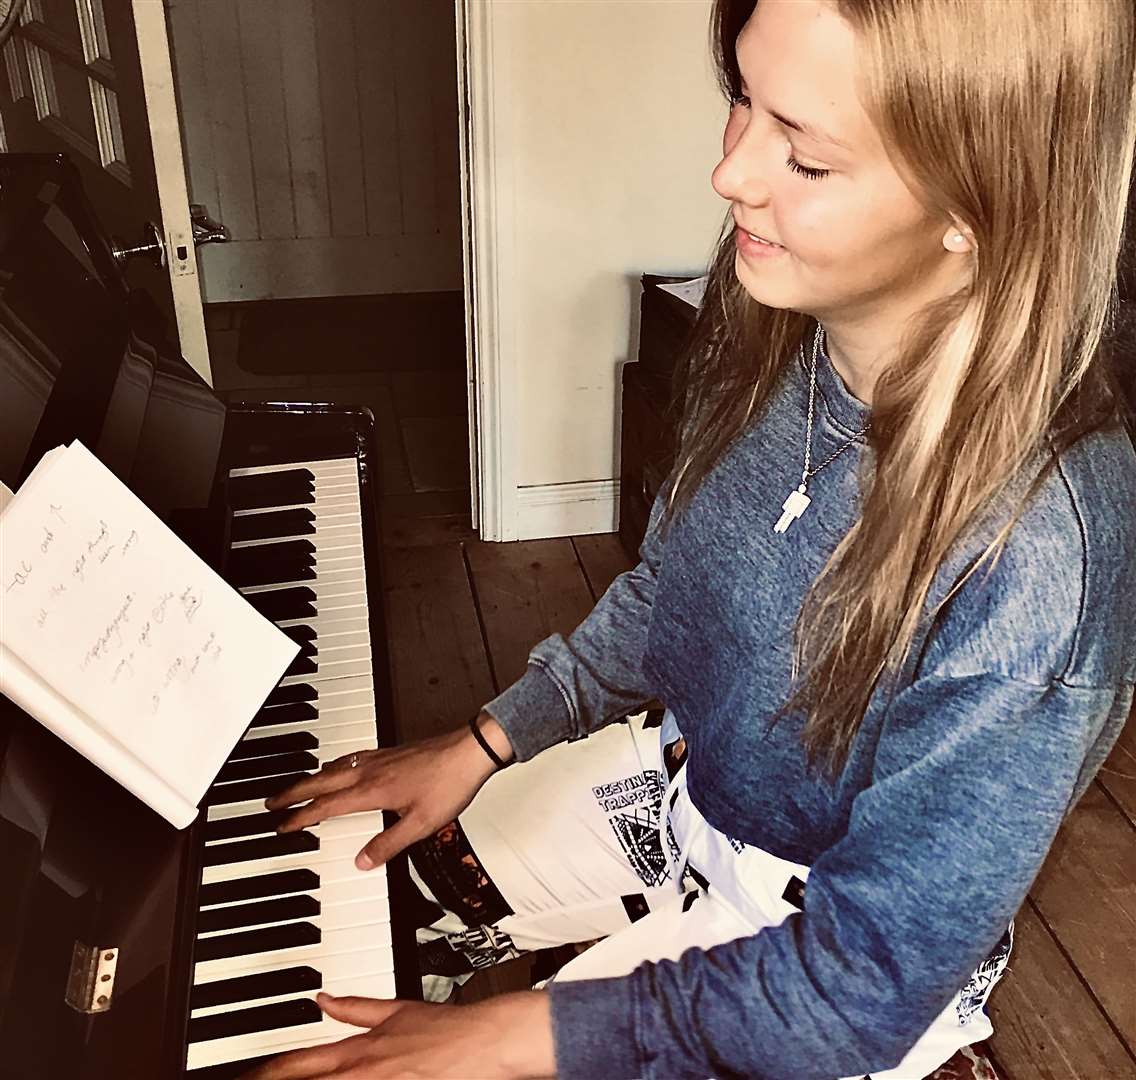 Immy Stroud spends lots of her time sat at the piano, writing songs